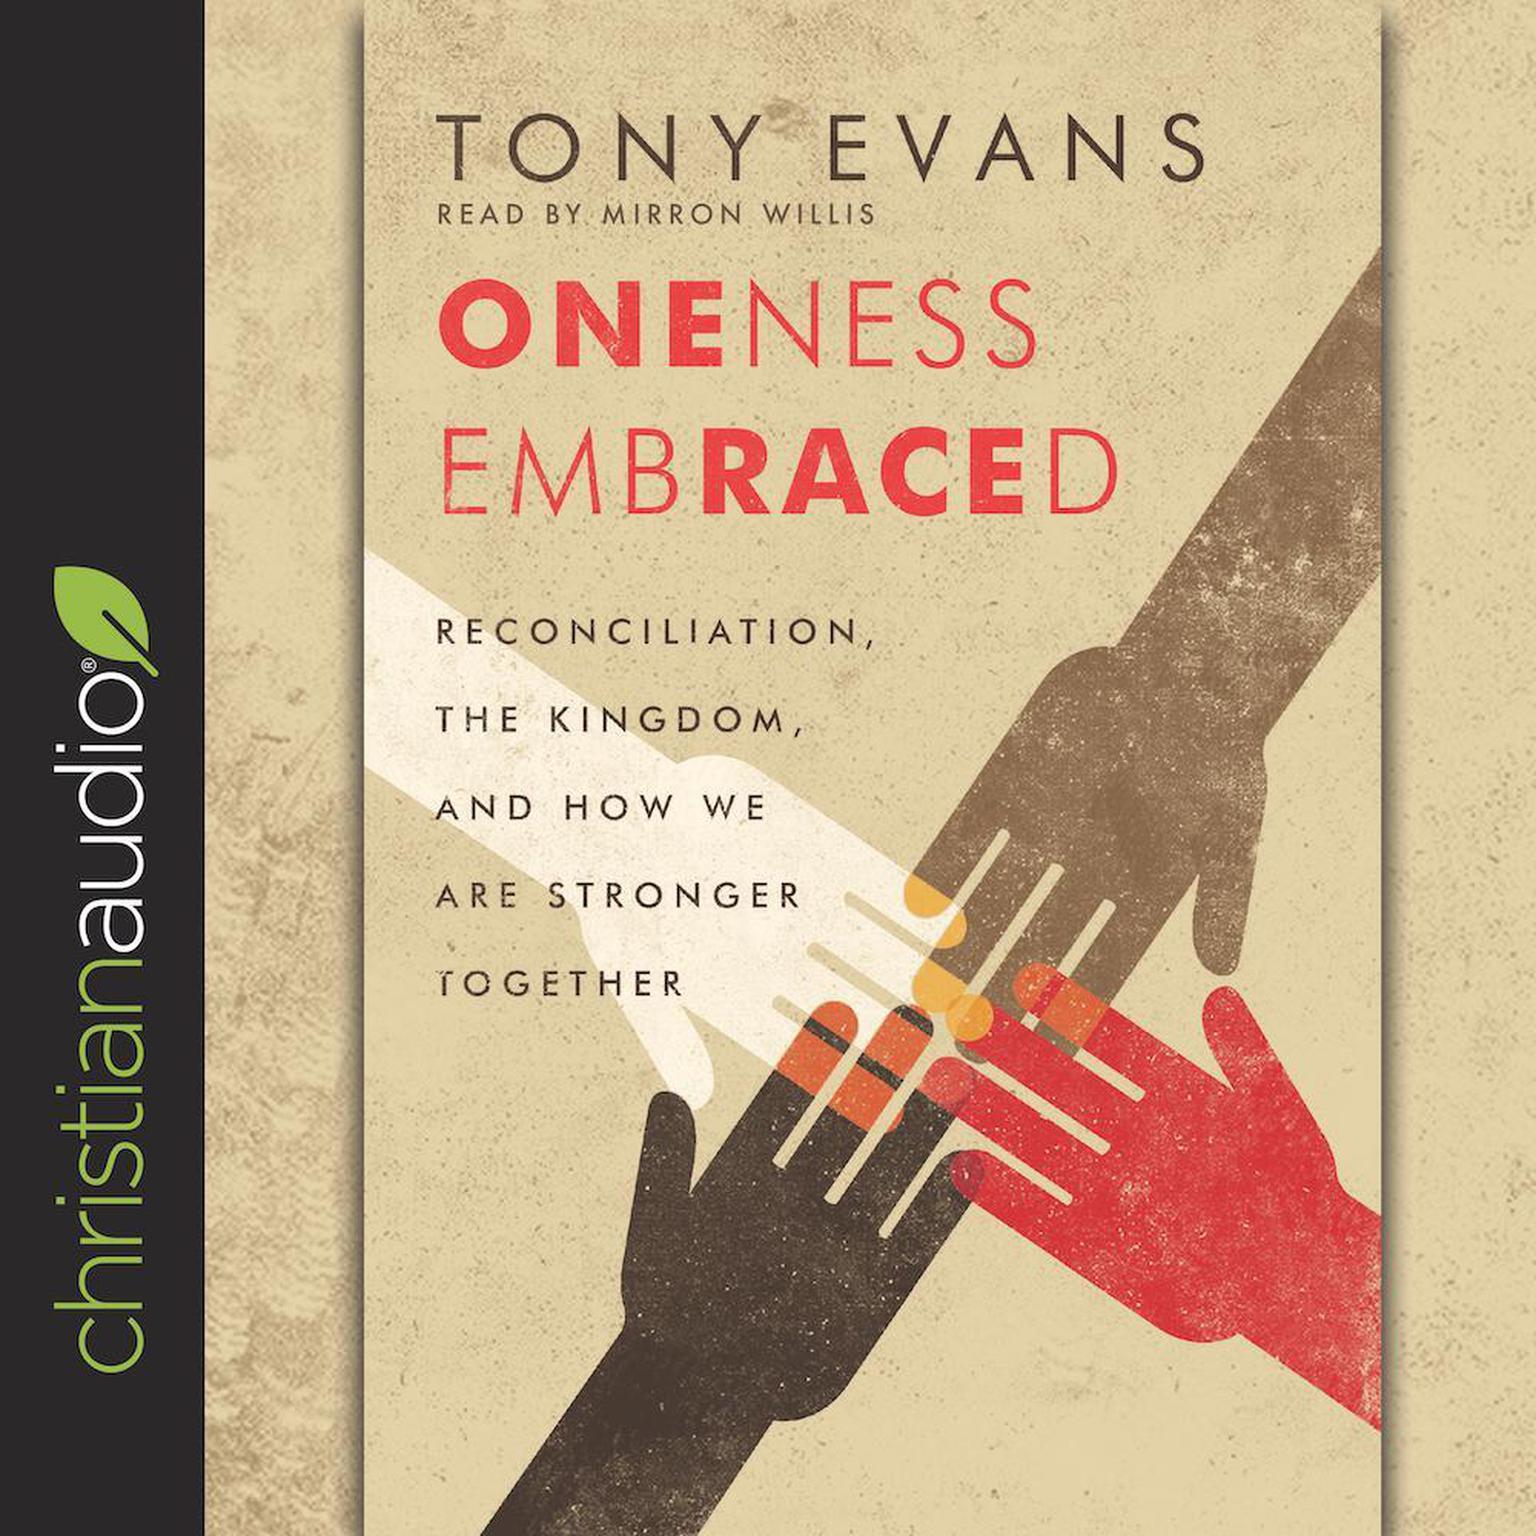 Oneness Embraced: Reconciliation, the Kingdom, and How We are Stronger Together Audiobook, by Tony Evans